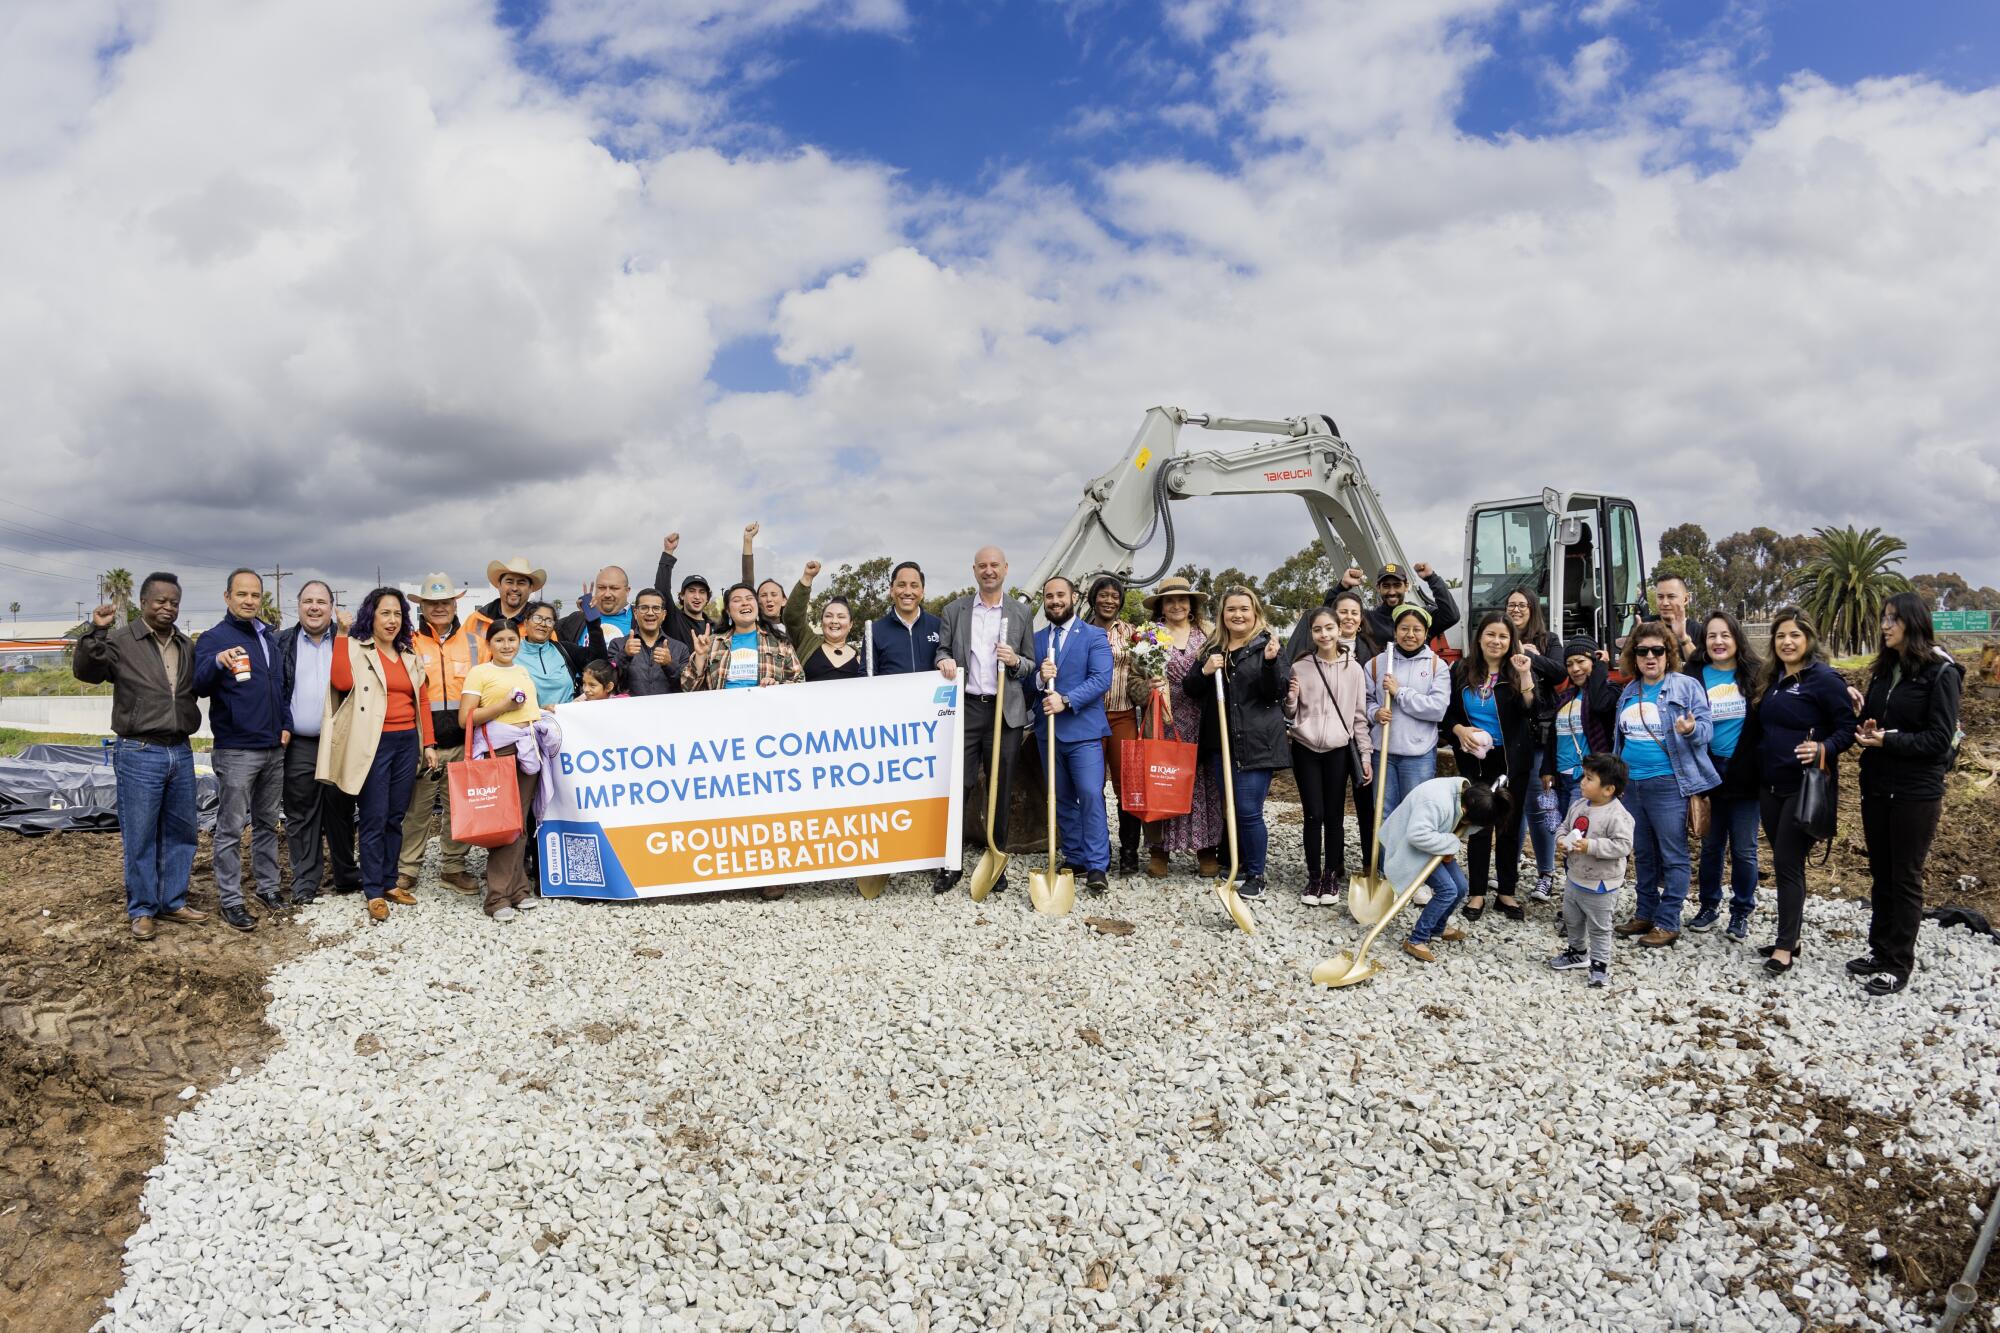 A group photo at a celebratory groundbreaking.